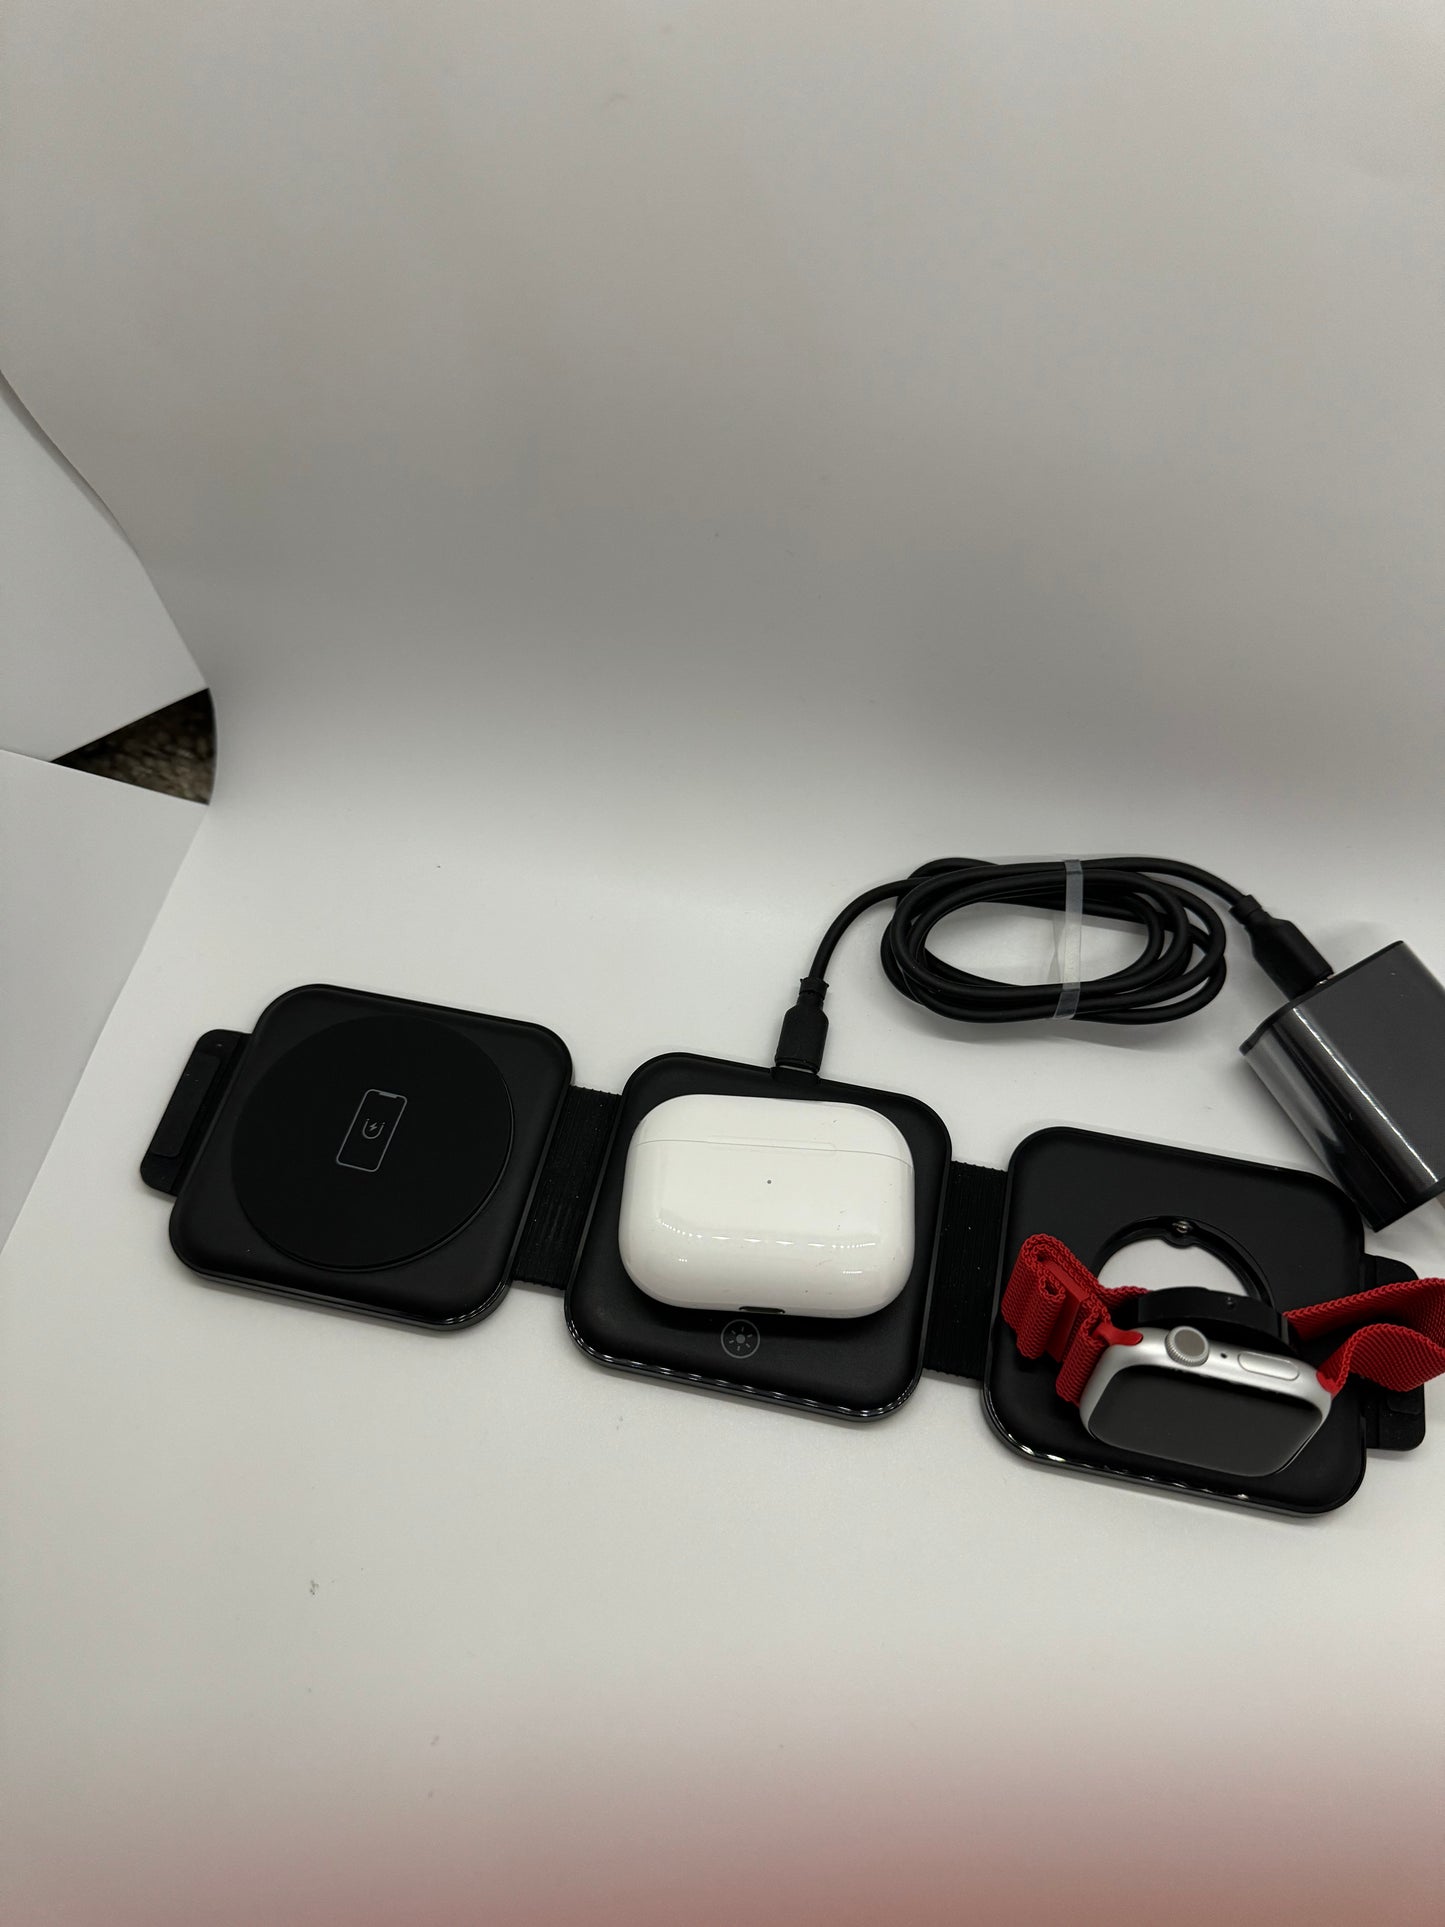 Be My AI: The picture shows a few items placed on a white surface. From left to right:

1. A square-shaped black device with rounded corners. It has a single button in the center with a power icon on it.

2. Next to it, there is another square-shaped device with rounded corners. This one is black with a white rectangular object inside it. The white object has a circular button with a power icon.

3. Next to the second device, there is a third square-shaped device with rounded corners. It is black with a red